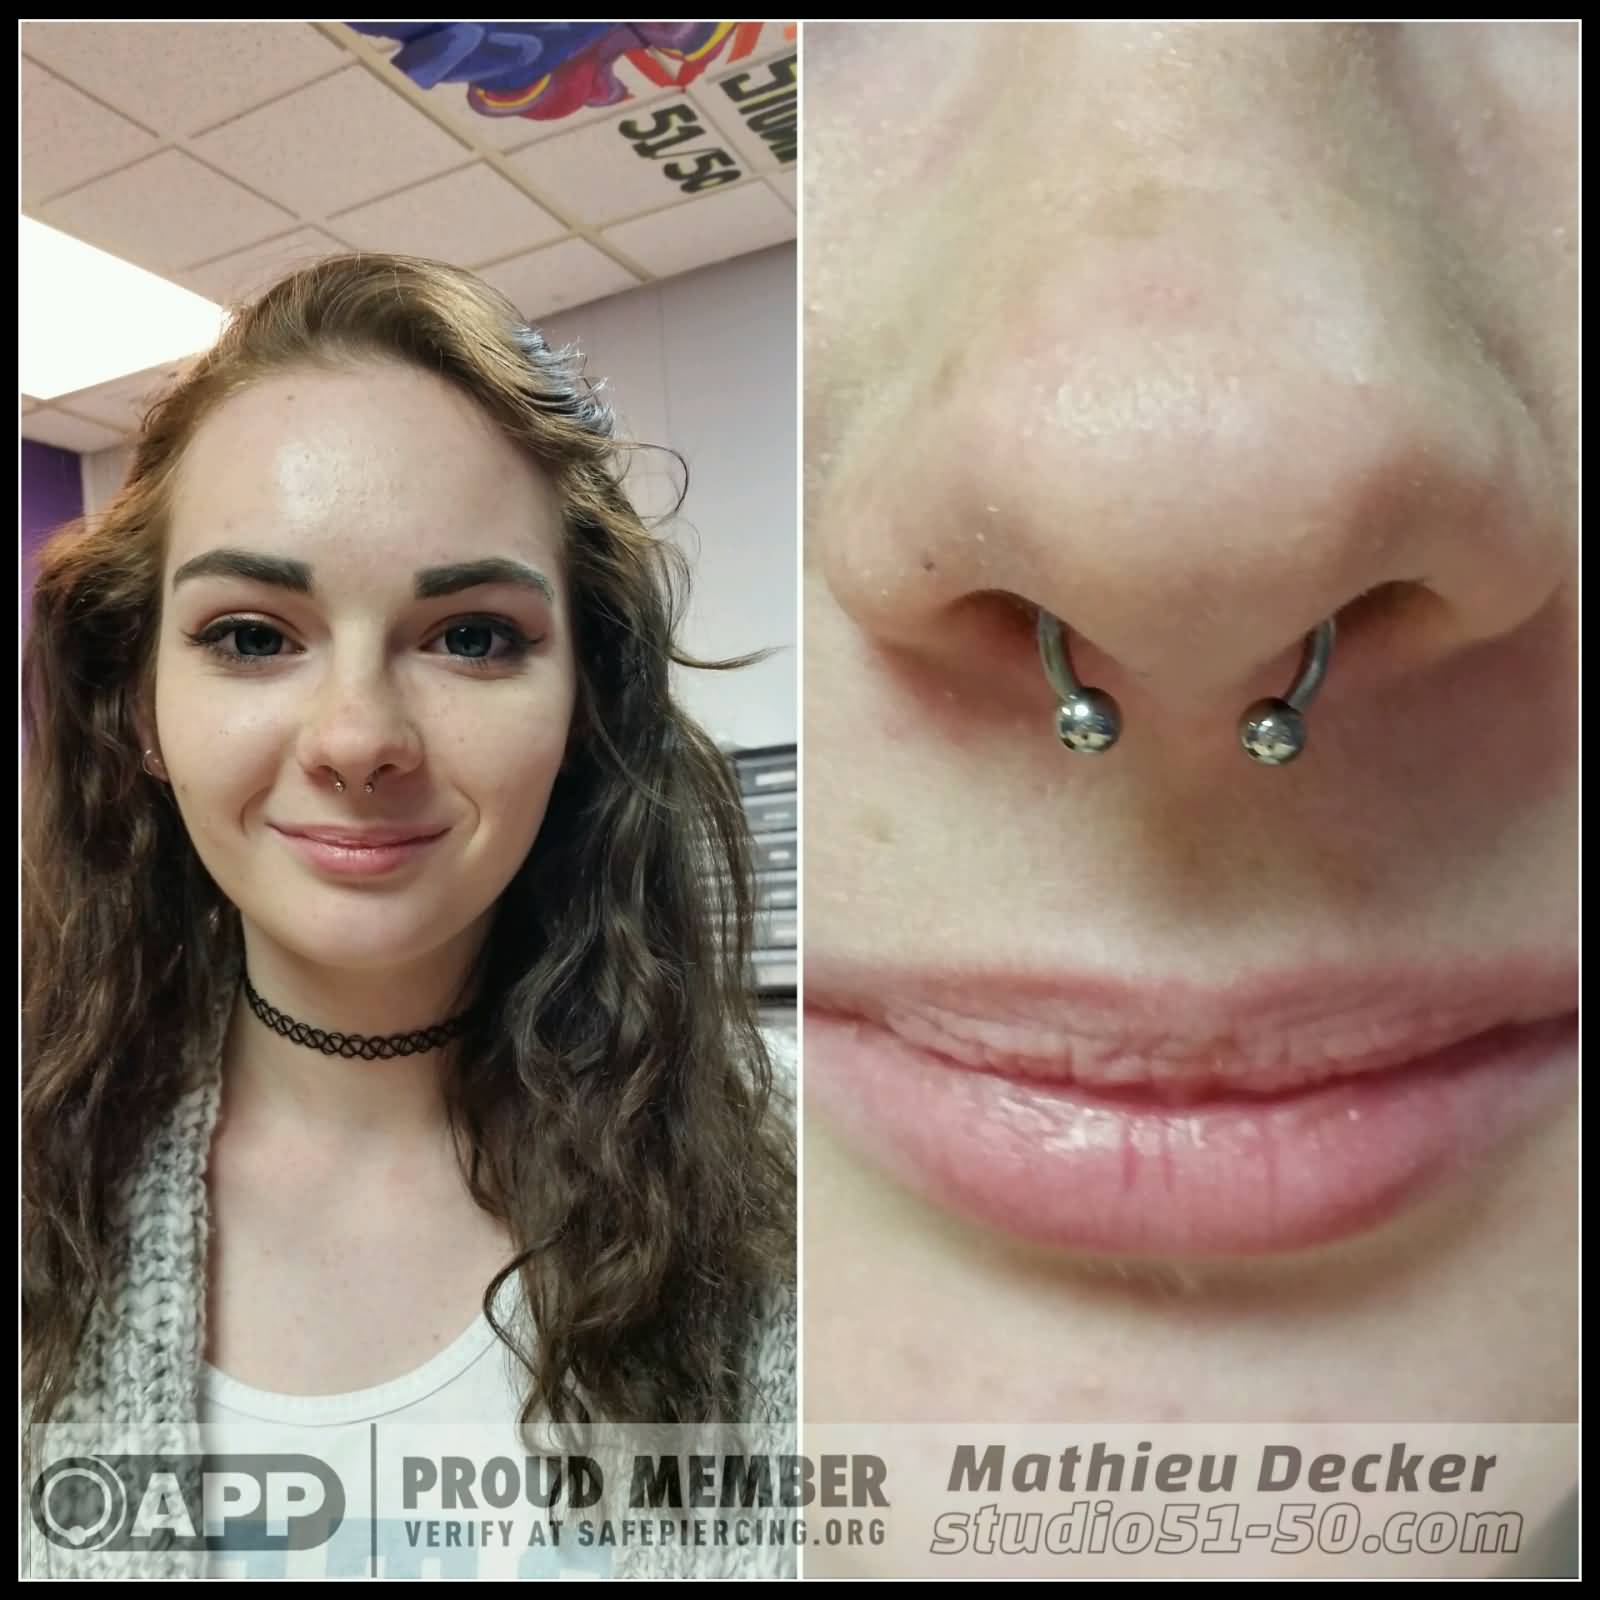 Cute Smiling Girl With Septum Piercing